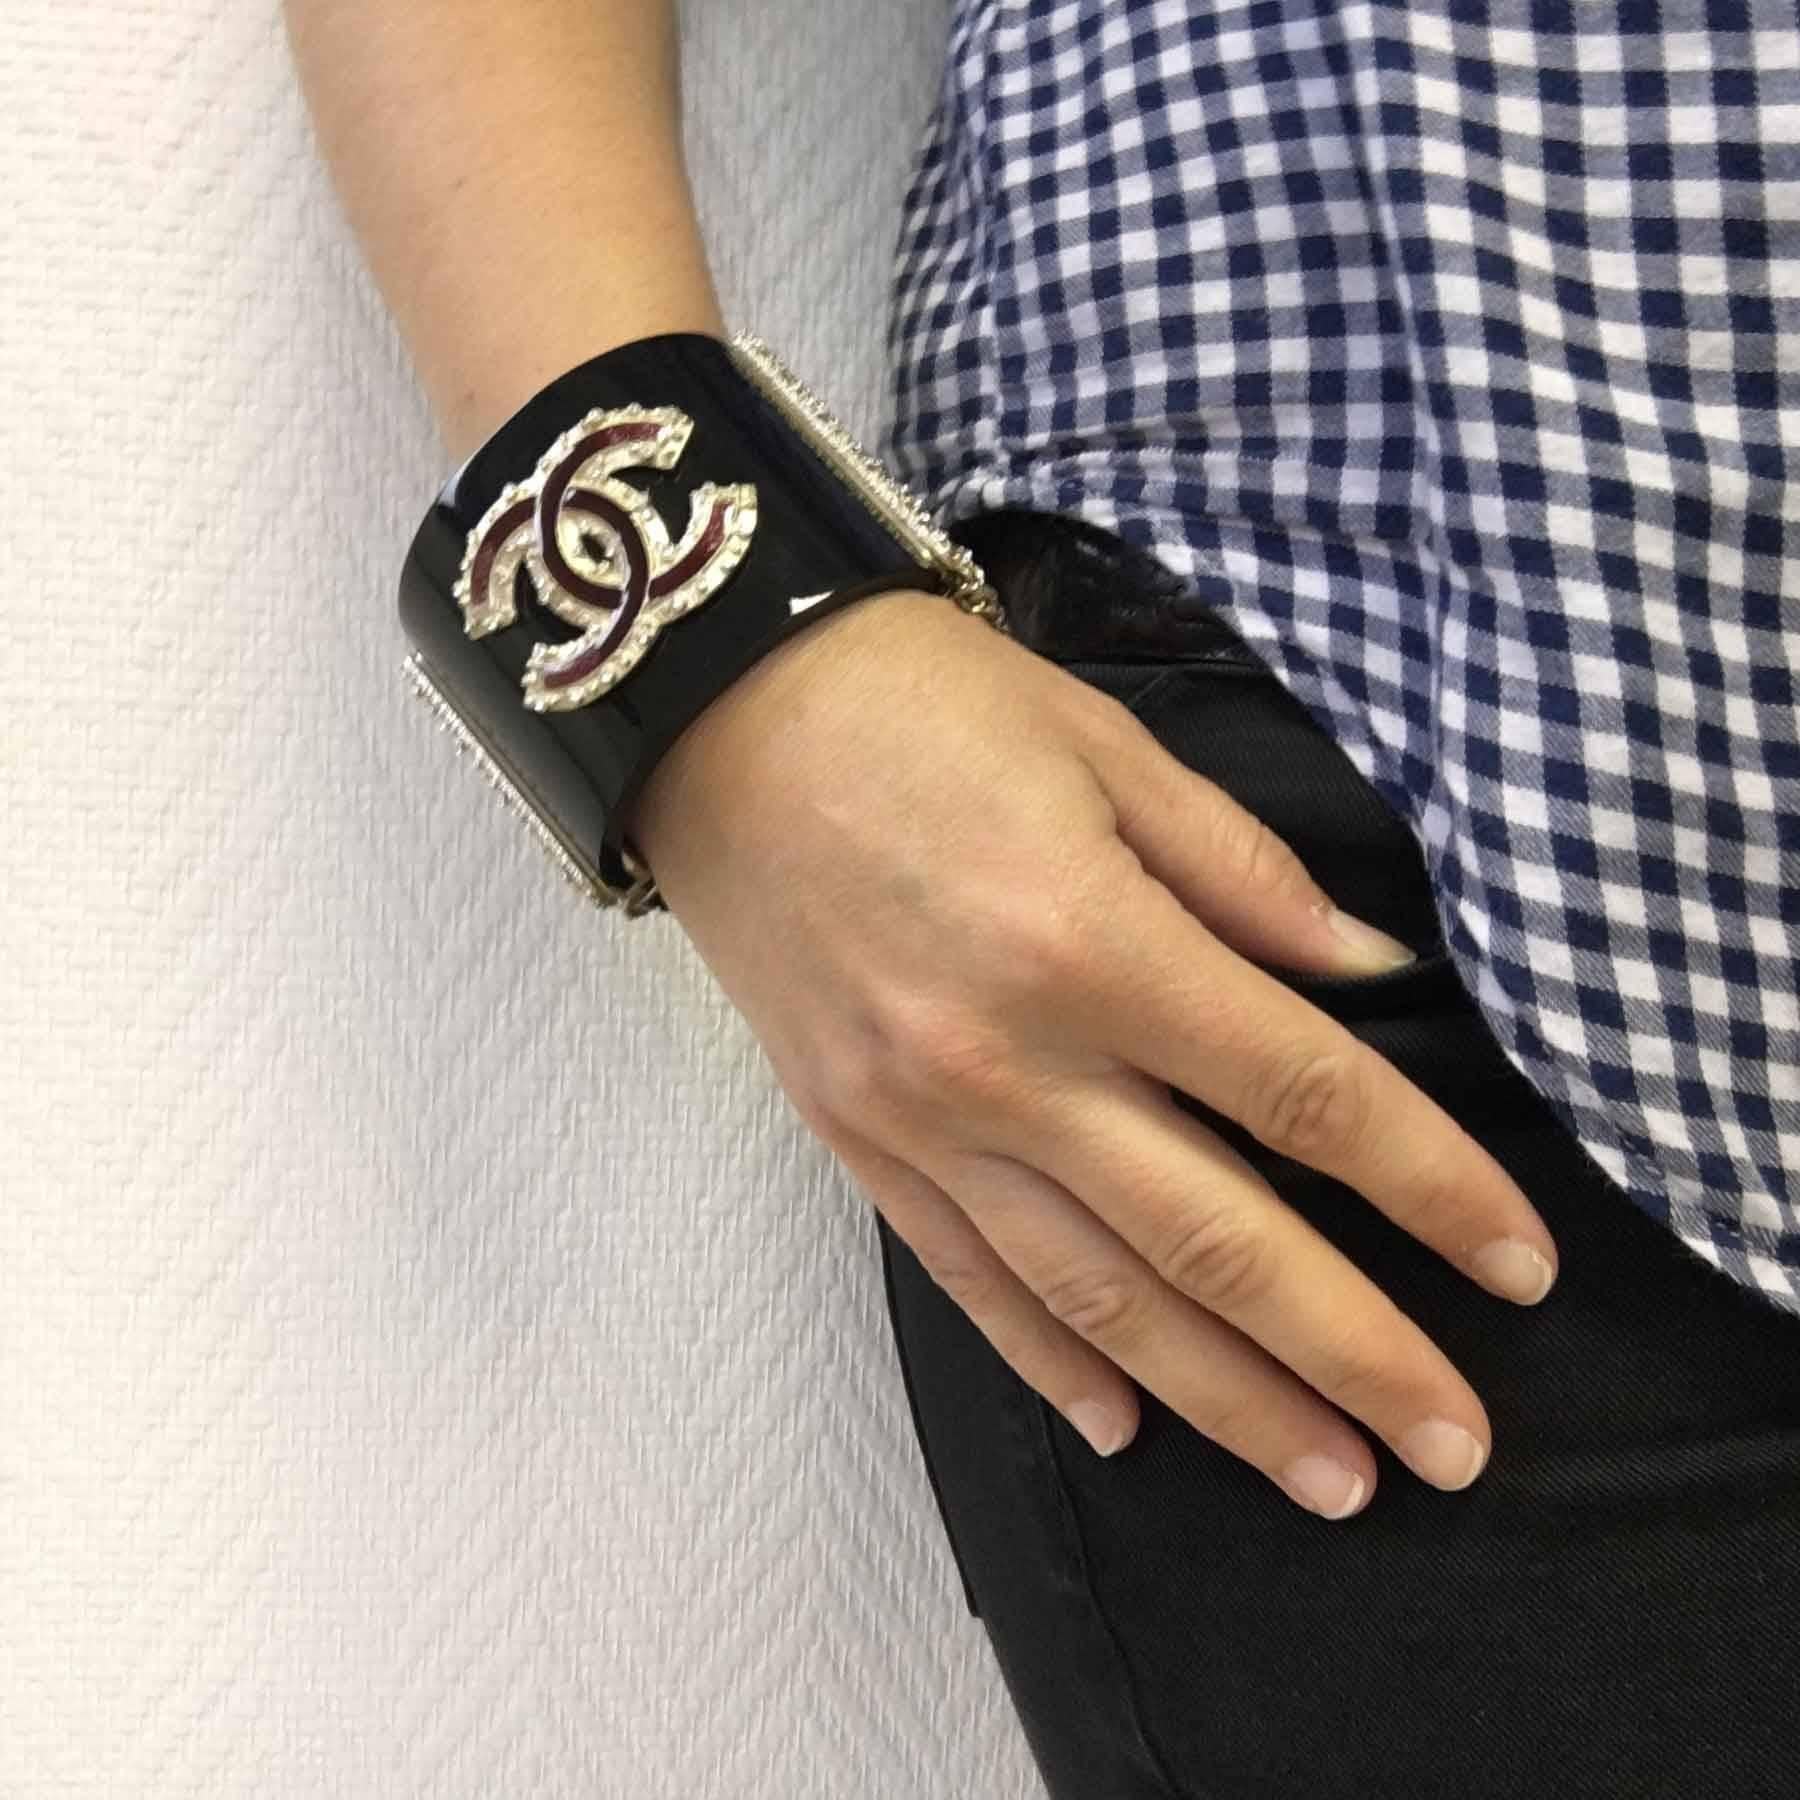 Black Chanel cuff, gold-tone metallic CC and burgundy resin set with small crystals. Safety chain.

Opens by a Chanel push button. Spring Collection 2011.

Wrist size 22.5 cm

Delivered in a Valois Vintage Paris dustbag.
